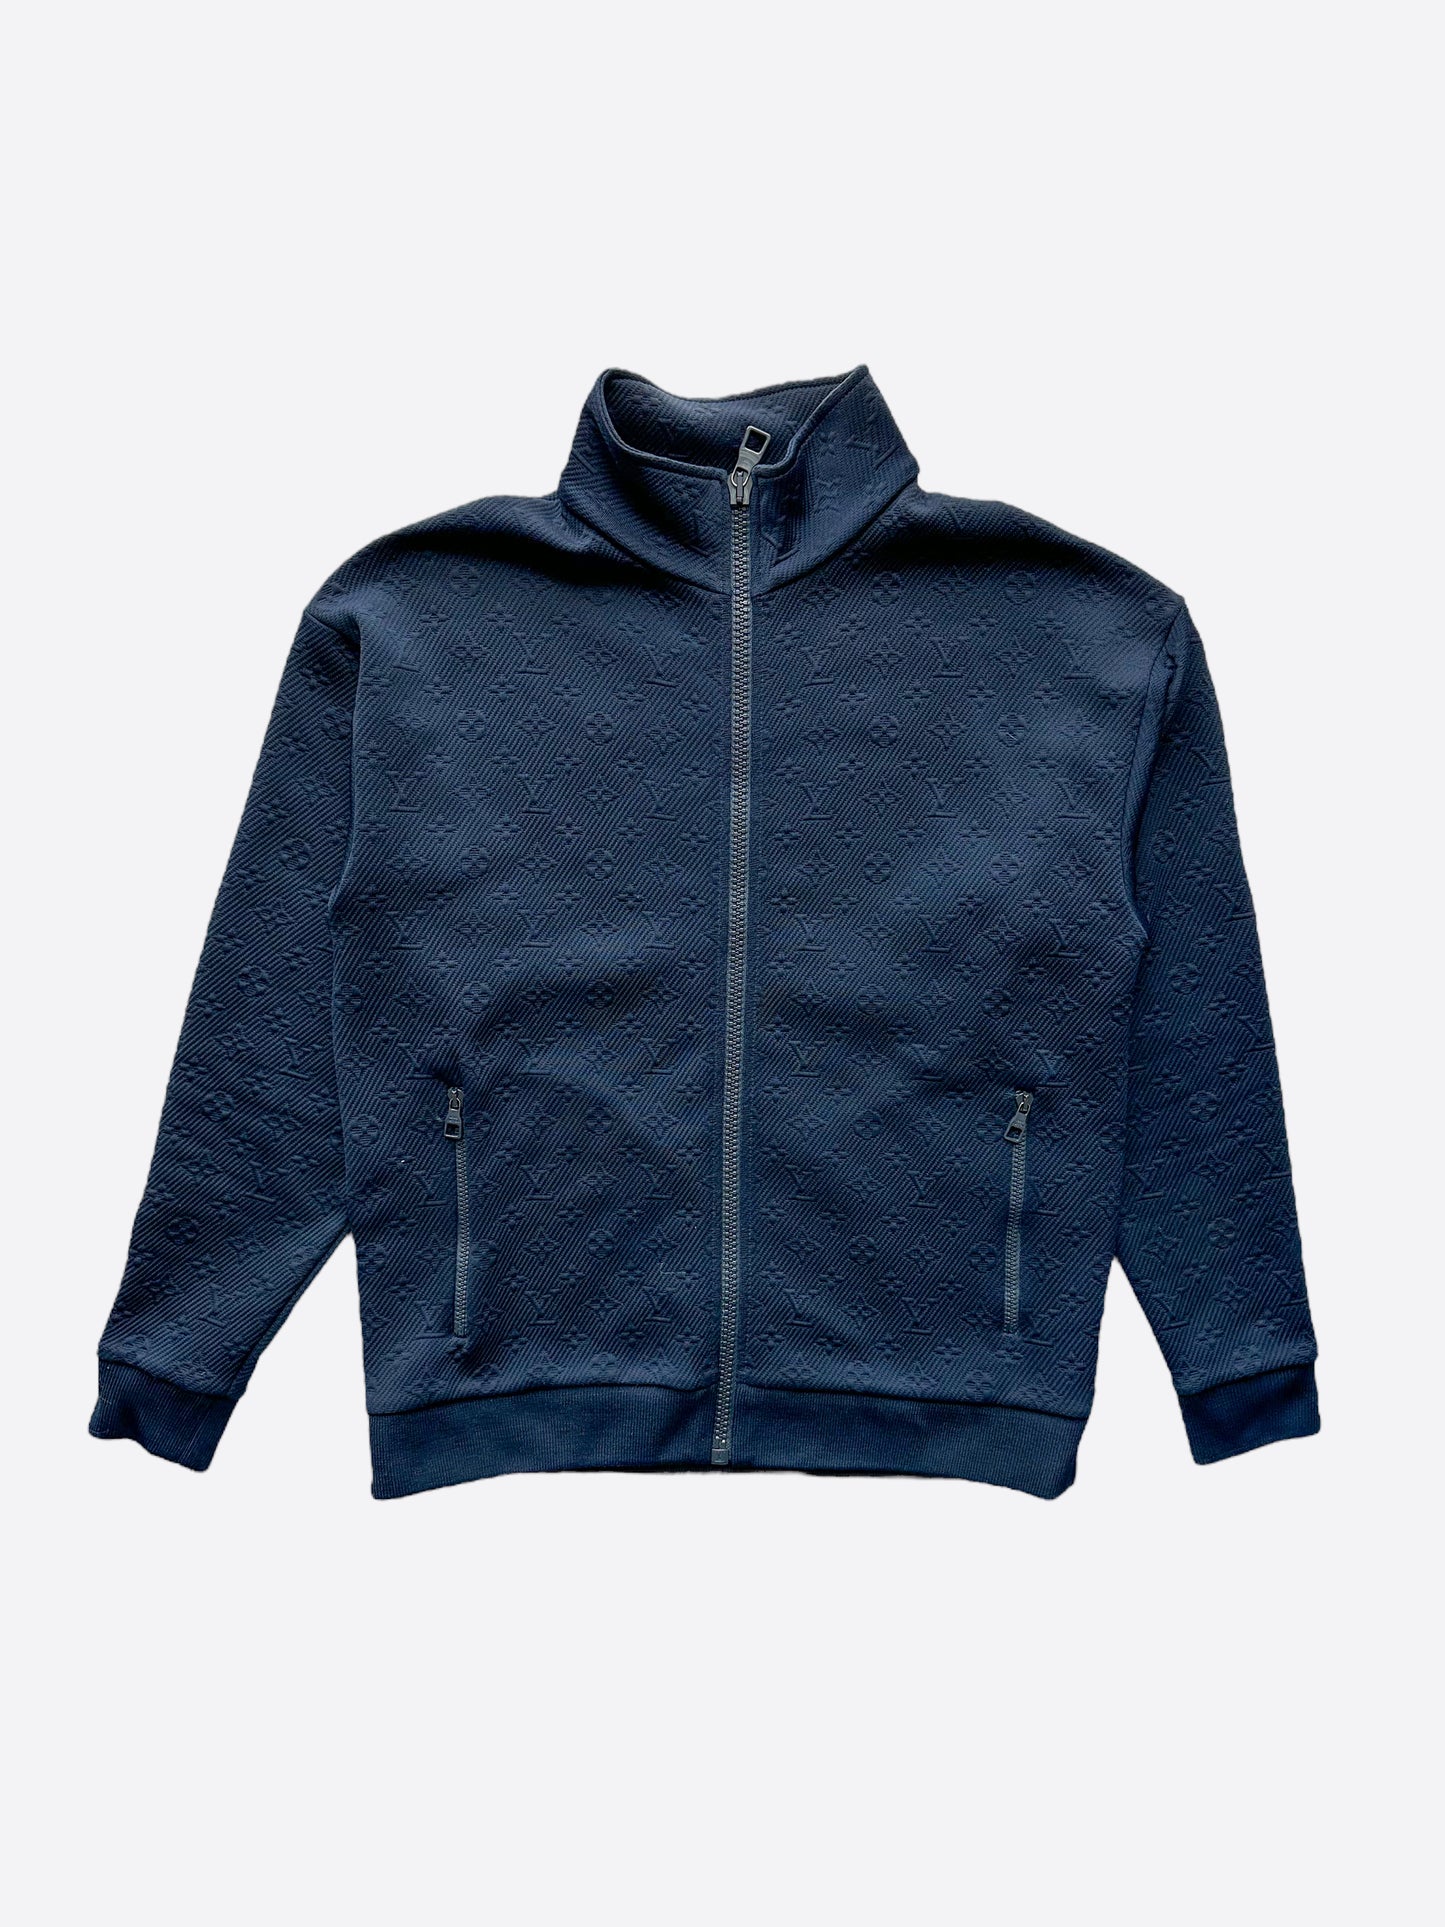 Louis Vuitton Mens Track Jackets, Navy, S